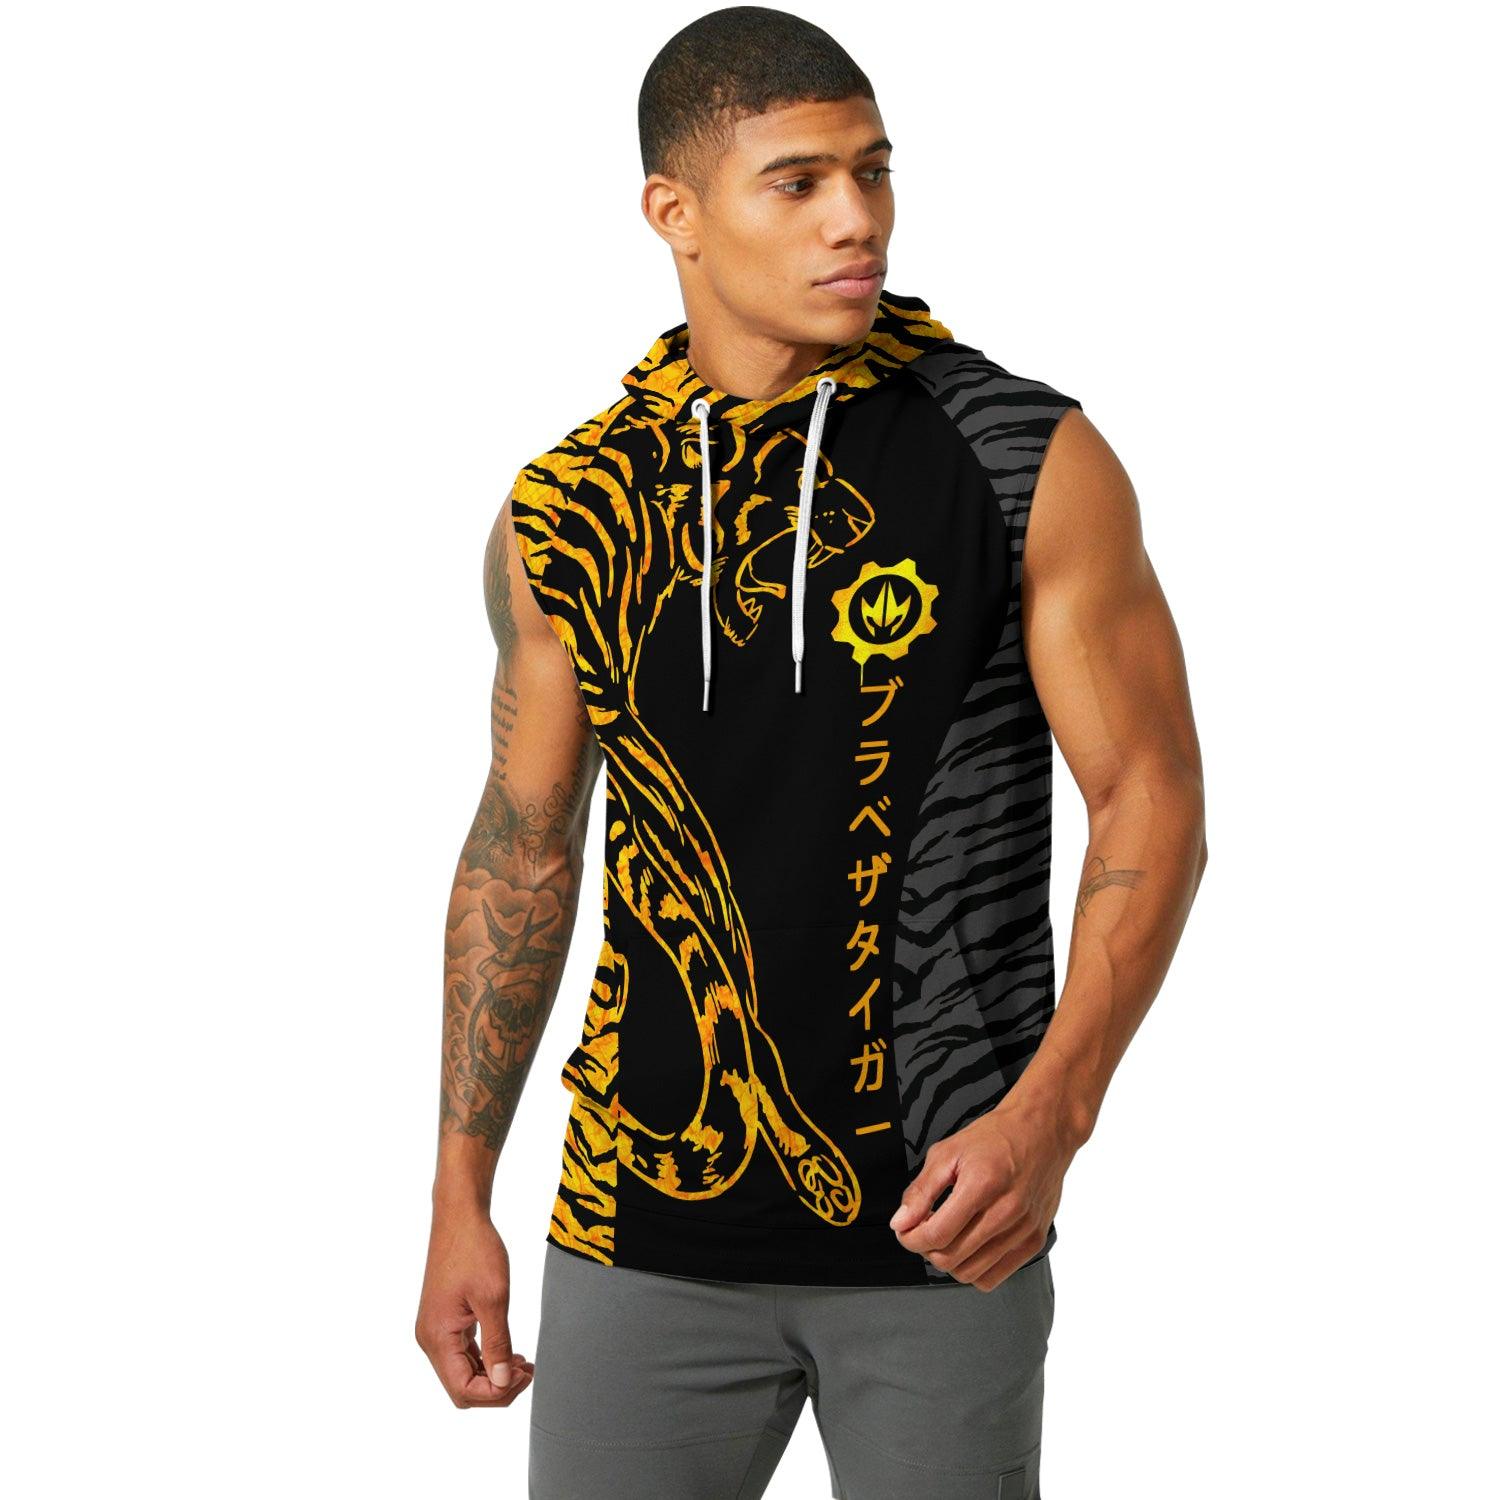 Tiger's Reflection Sleeveless Pullover & Zip Hoodie